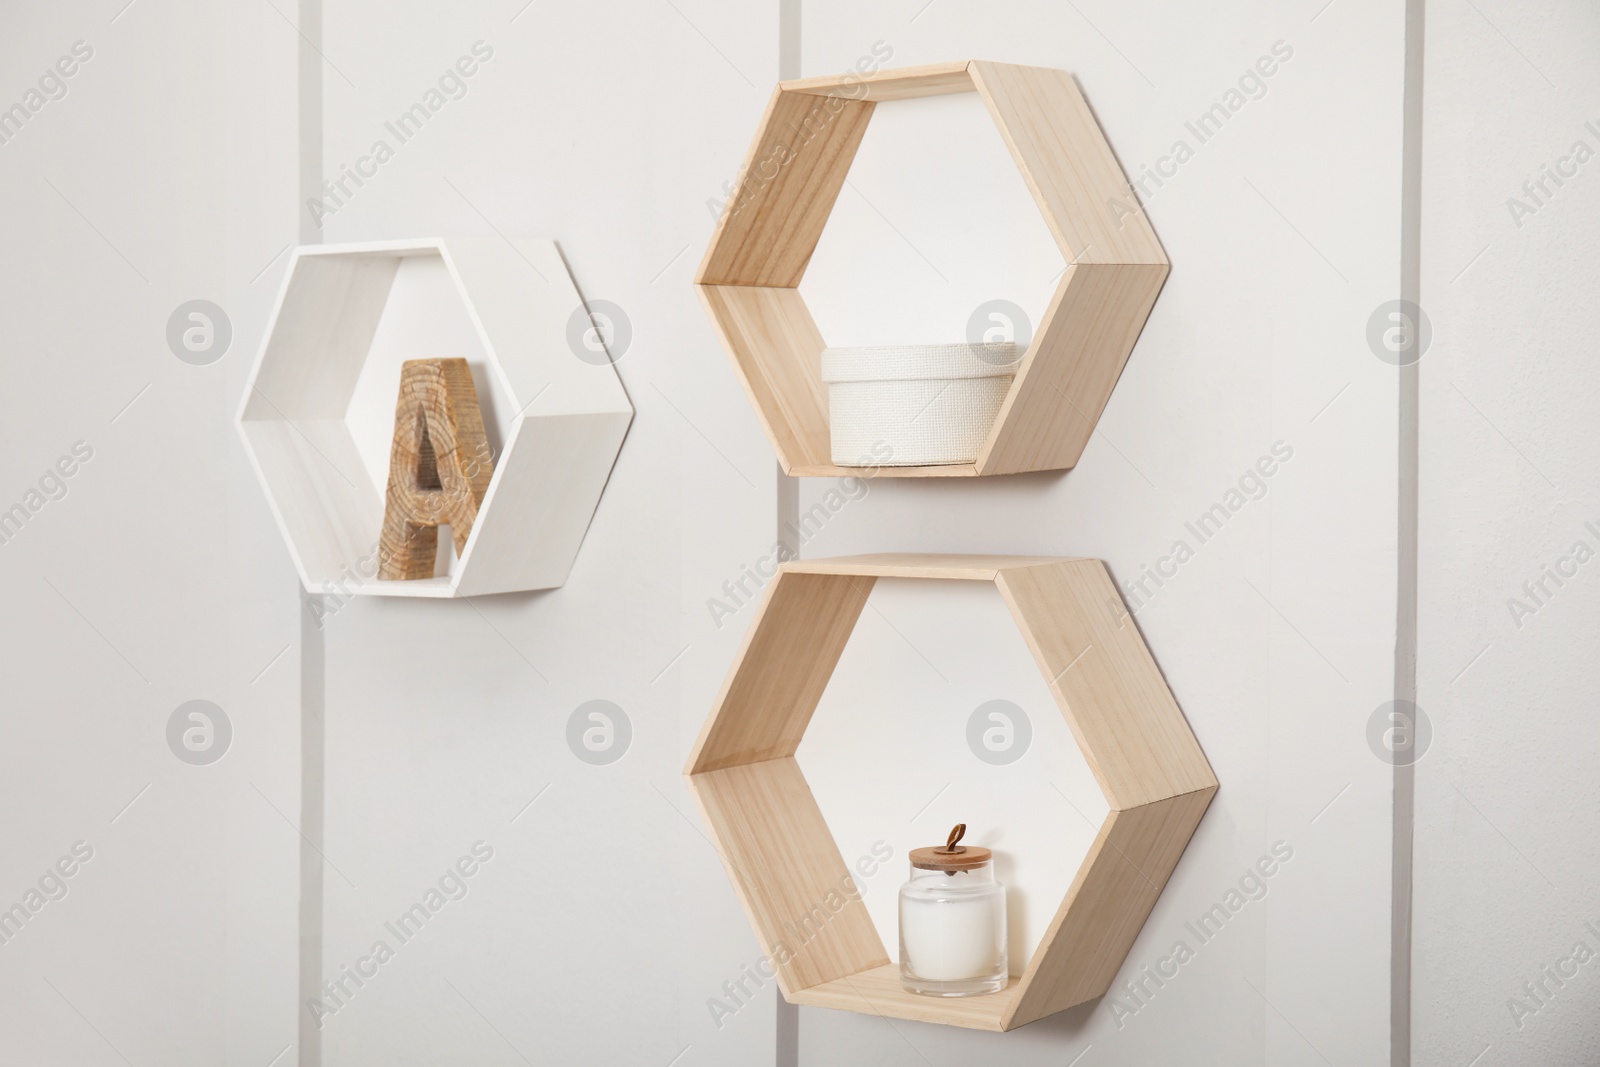 Photo of Honeycomb shaped shelves with decorative elements on white wall